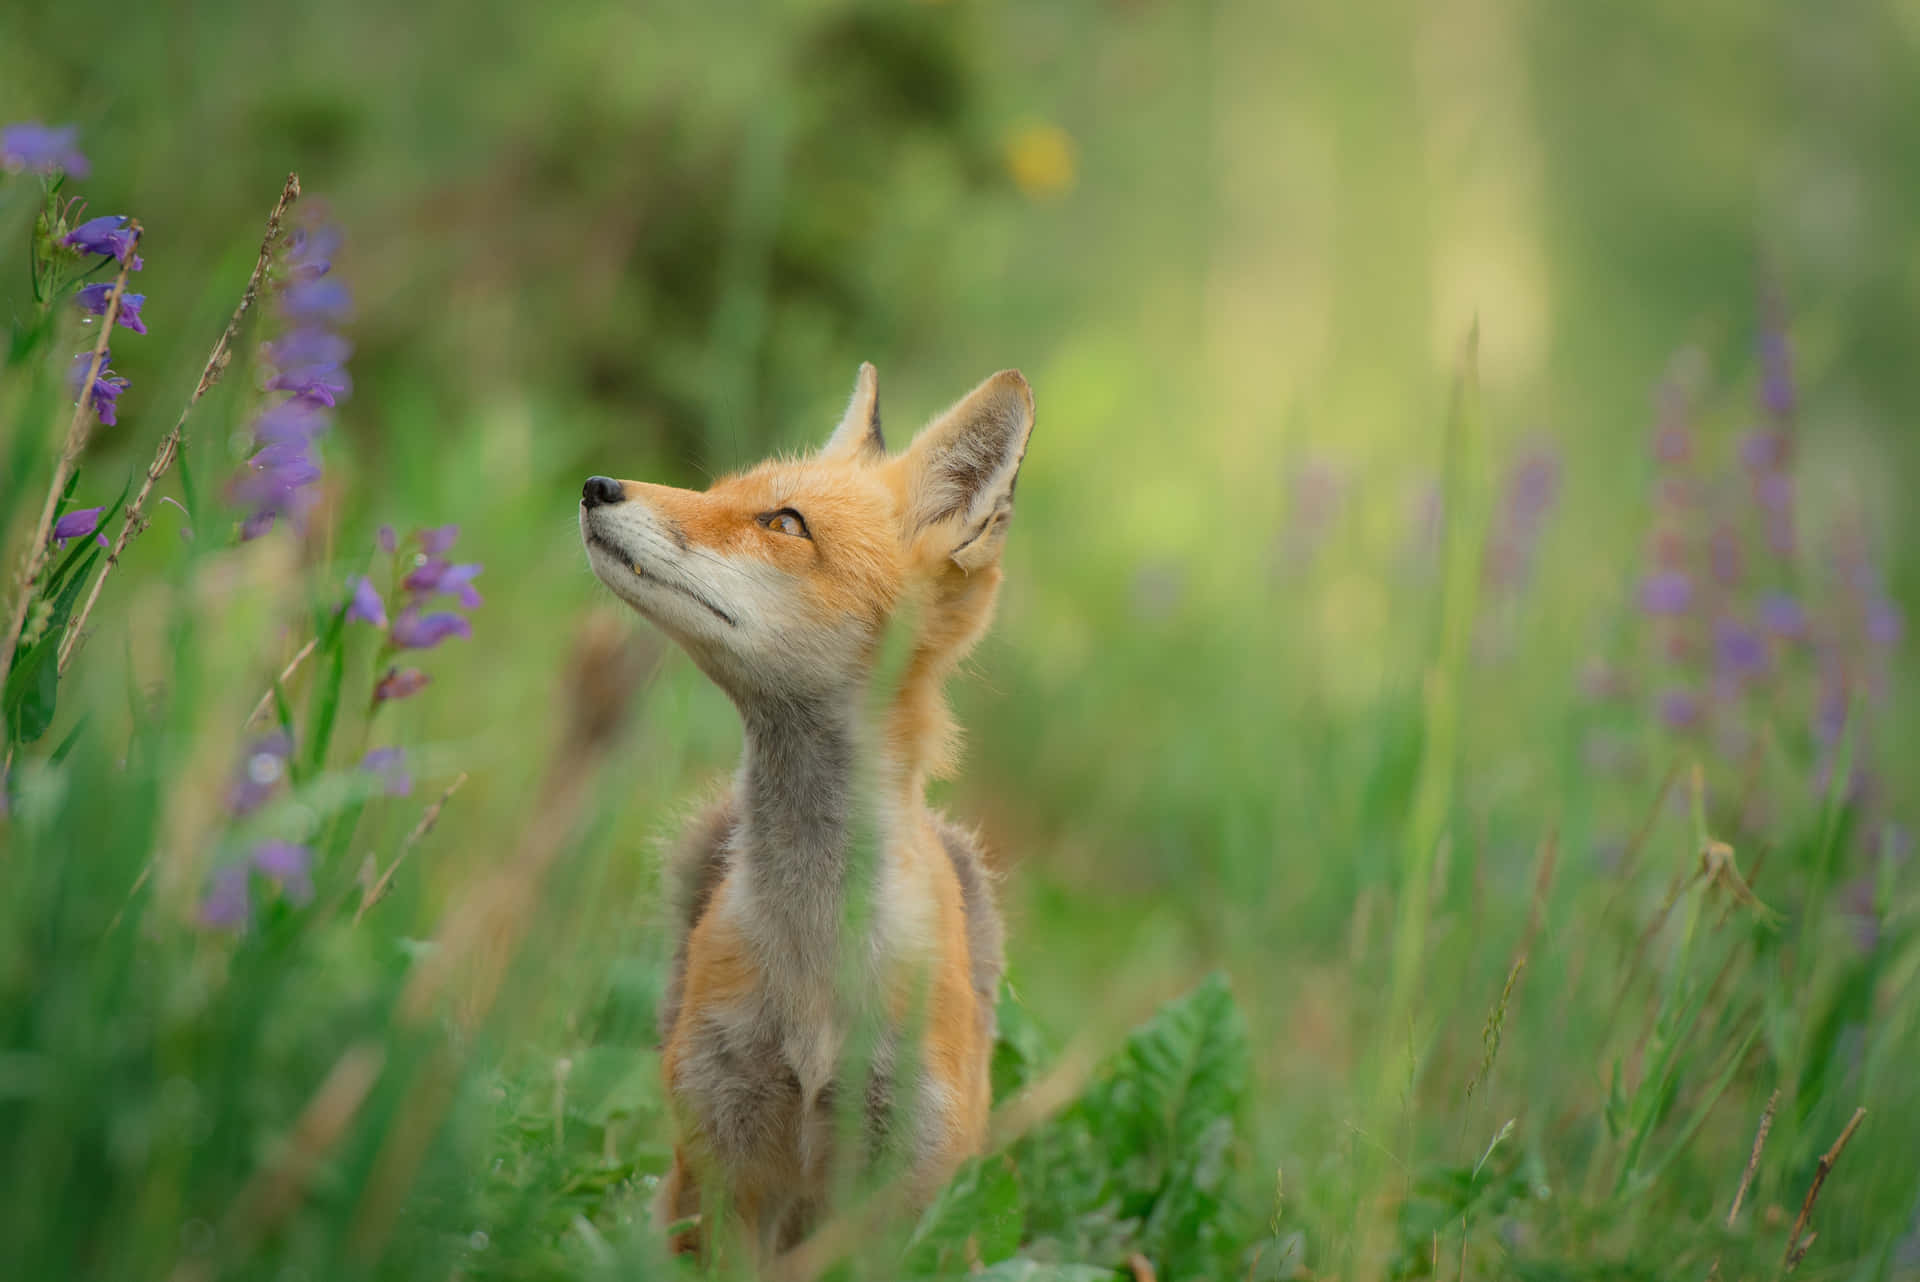 A beautiful Red Fox in its natural habitat